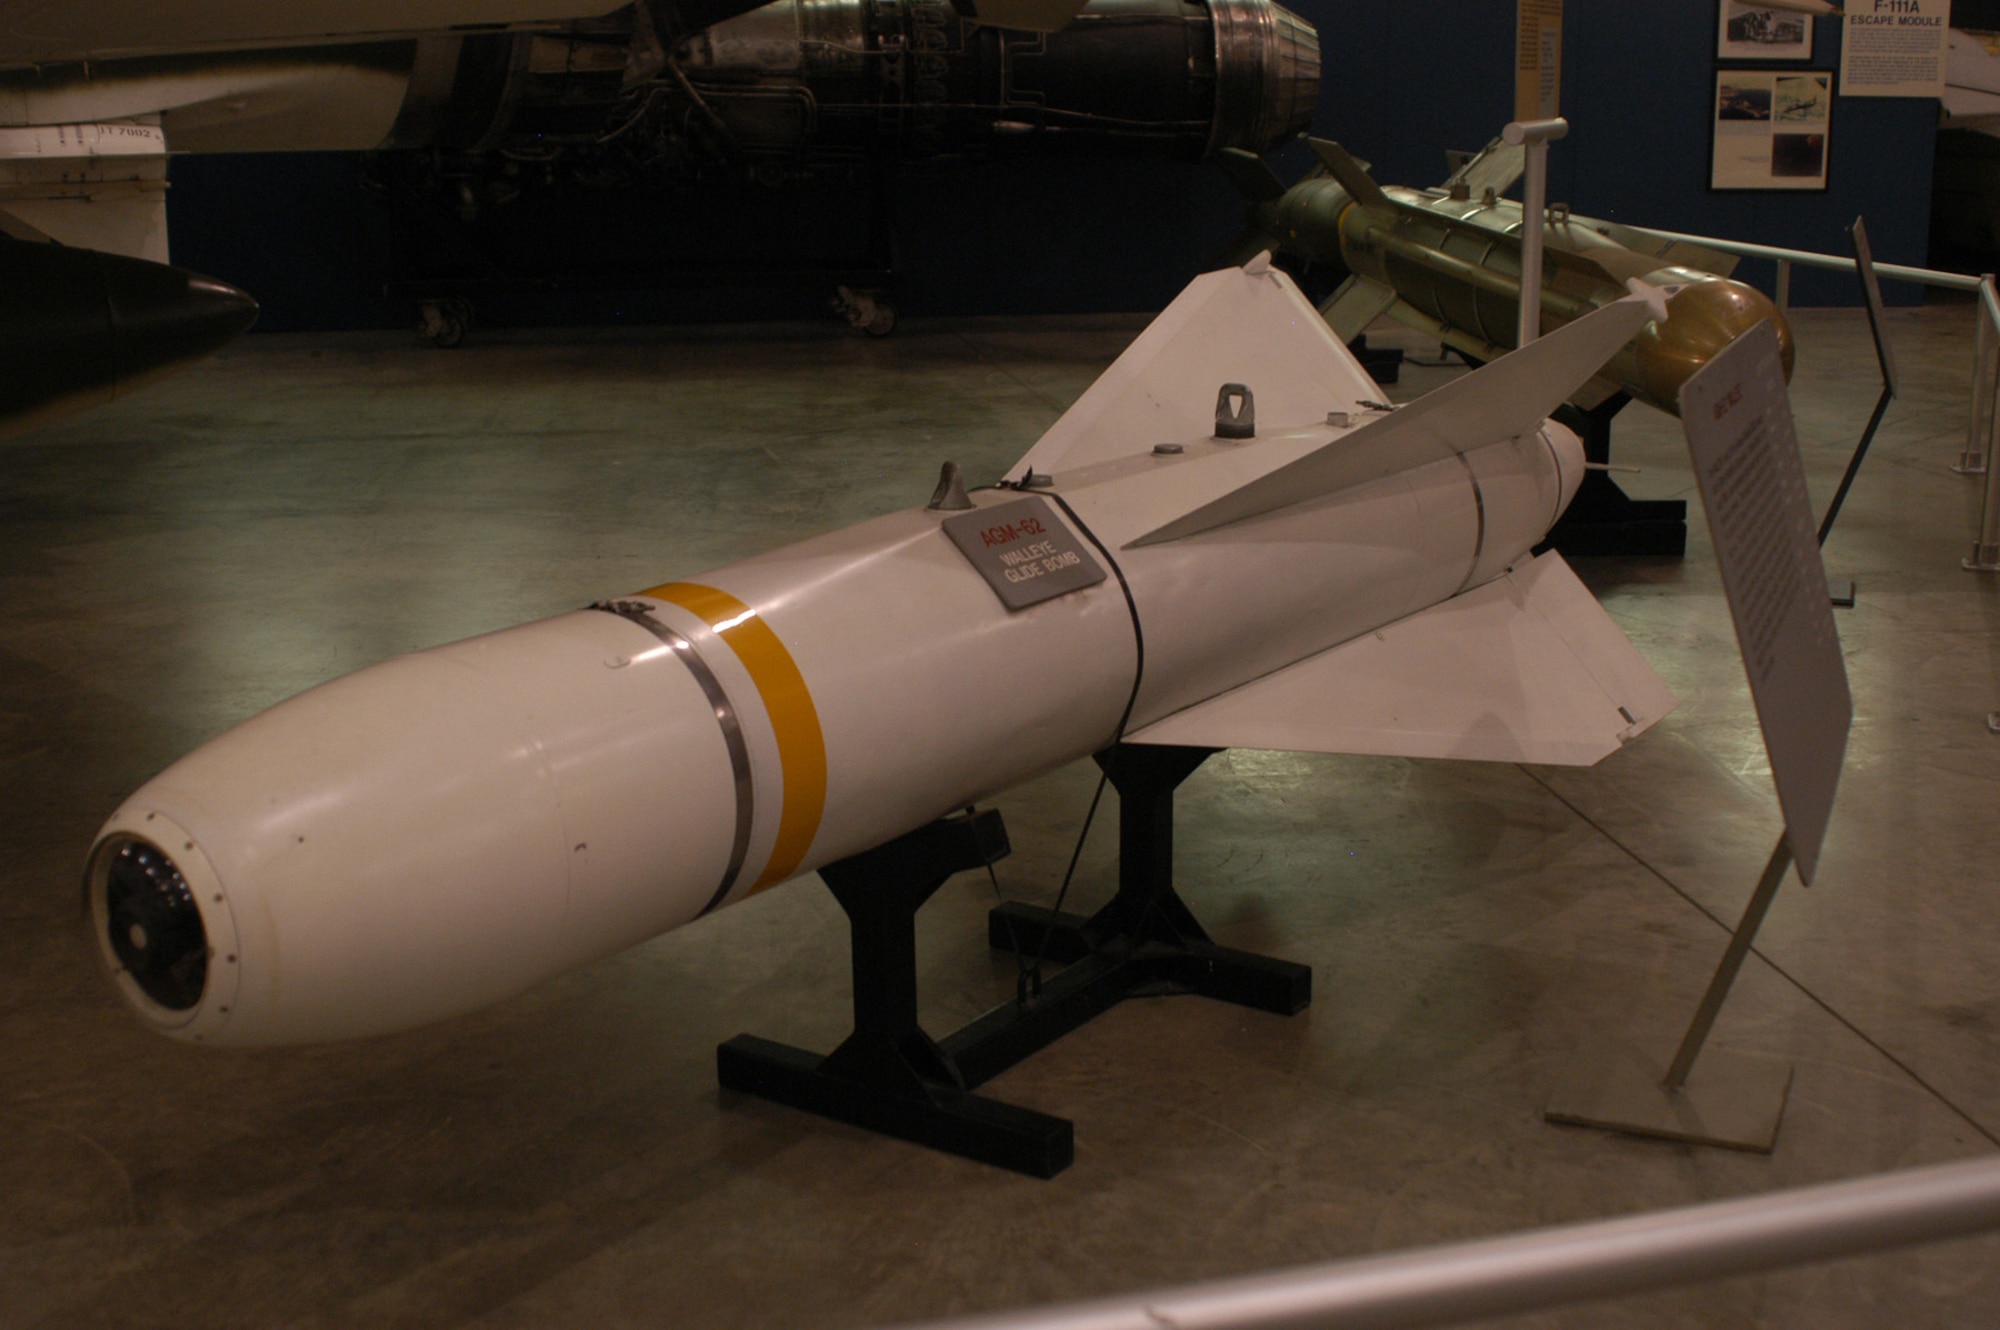 DAYTON, Ohio - Martin Marietta AGM-62 Walleye on display at the National Museum of the U.S. Air Force. (U.S. Air Force photo)